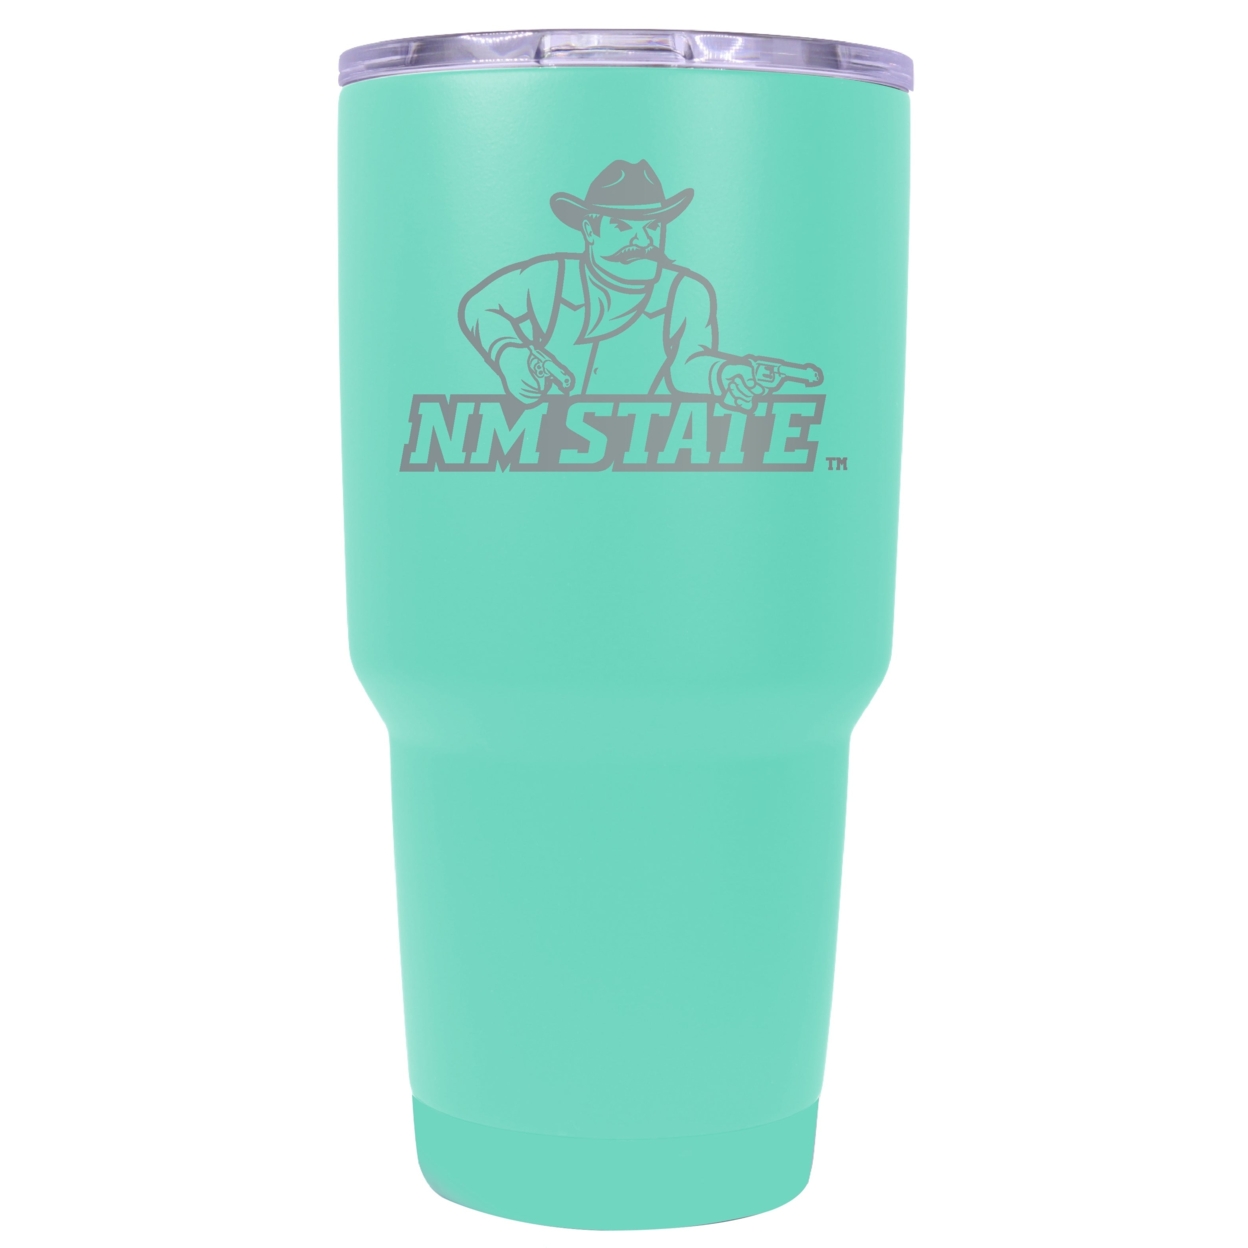 New Mexico State University Pistol Pete 24 Oz Laser Engraved Stainless Steel Insulated Tumbler - Choose Your Color. - Seafoam